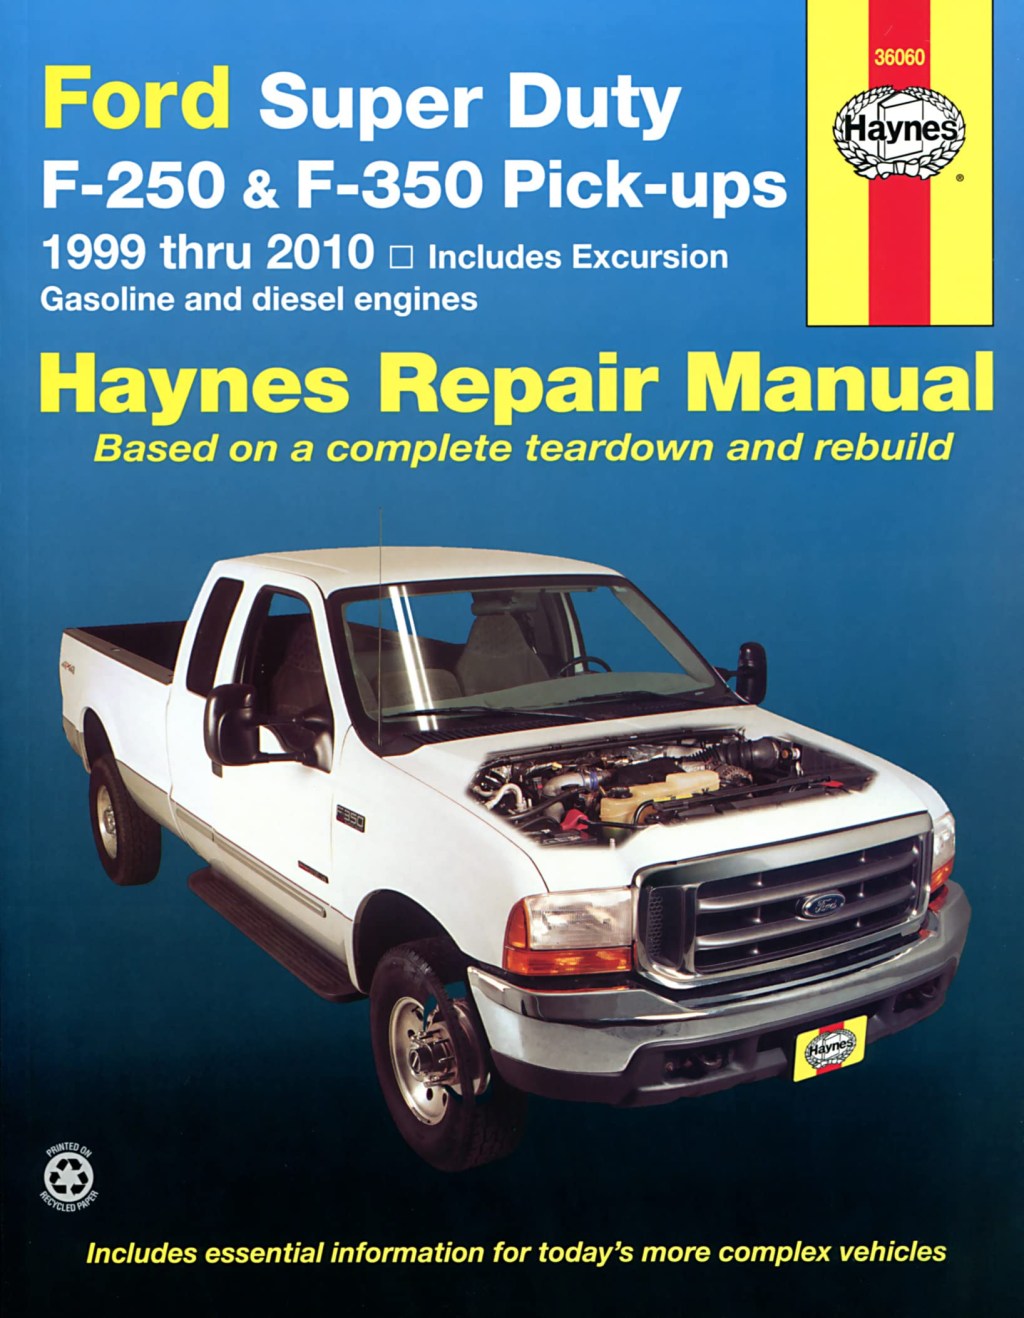 Picture of: Haynes Ford Super Duty Pick-Ups and Excursion Automotve Repair Manual